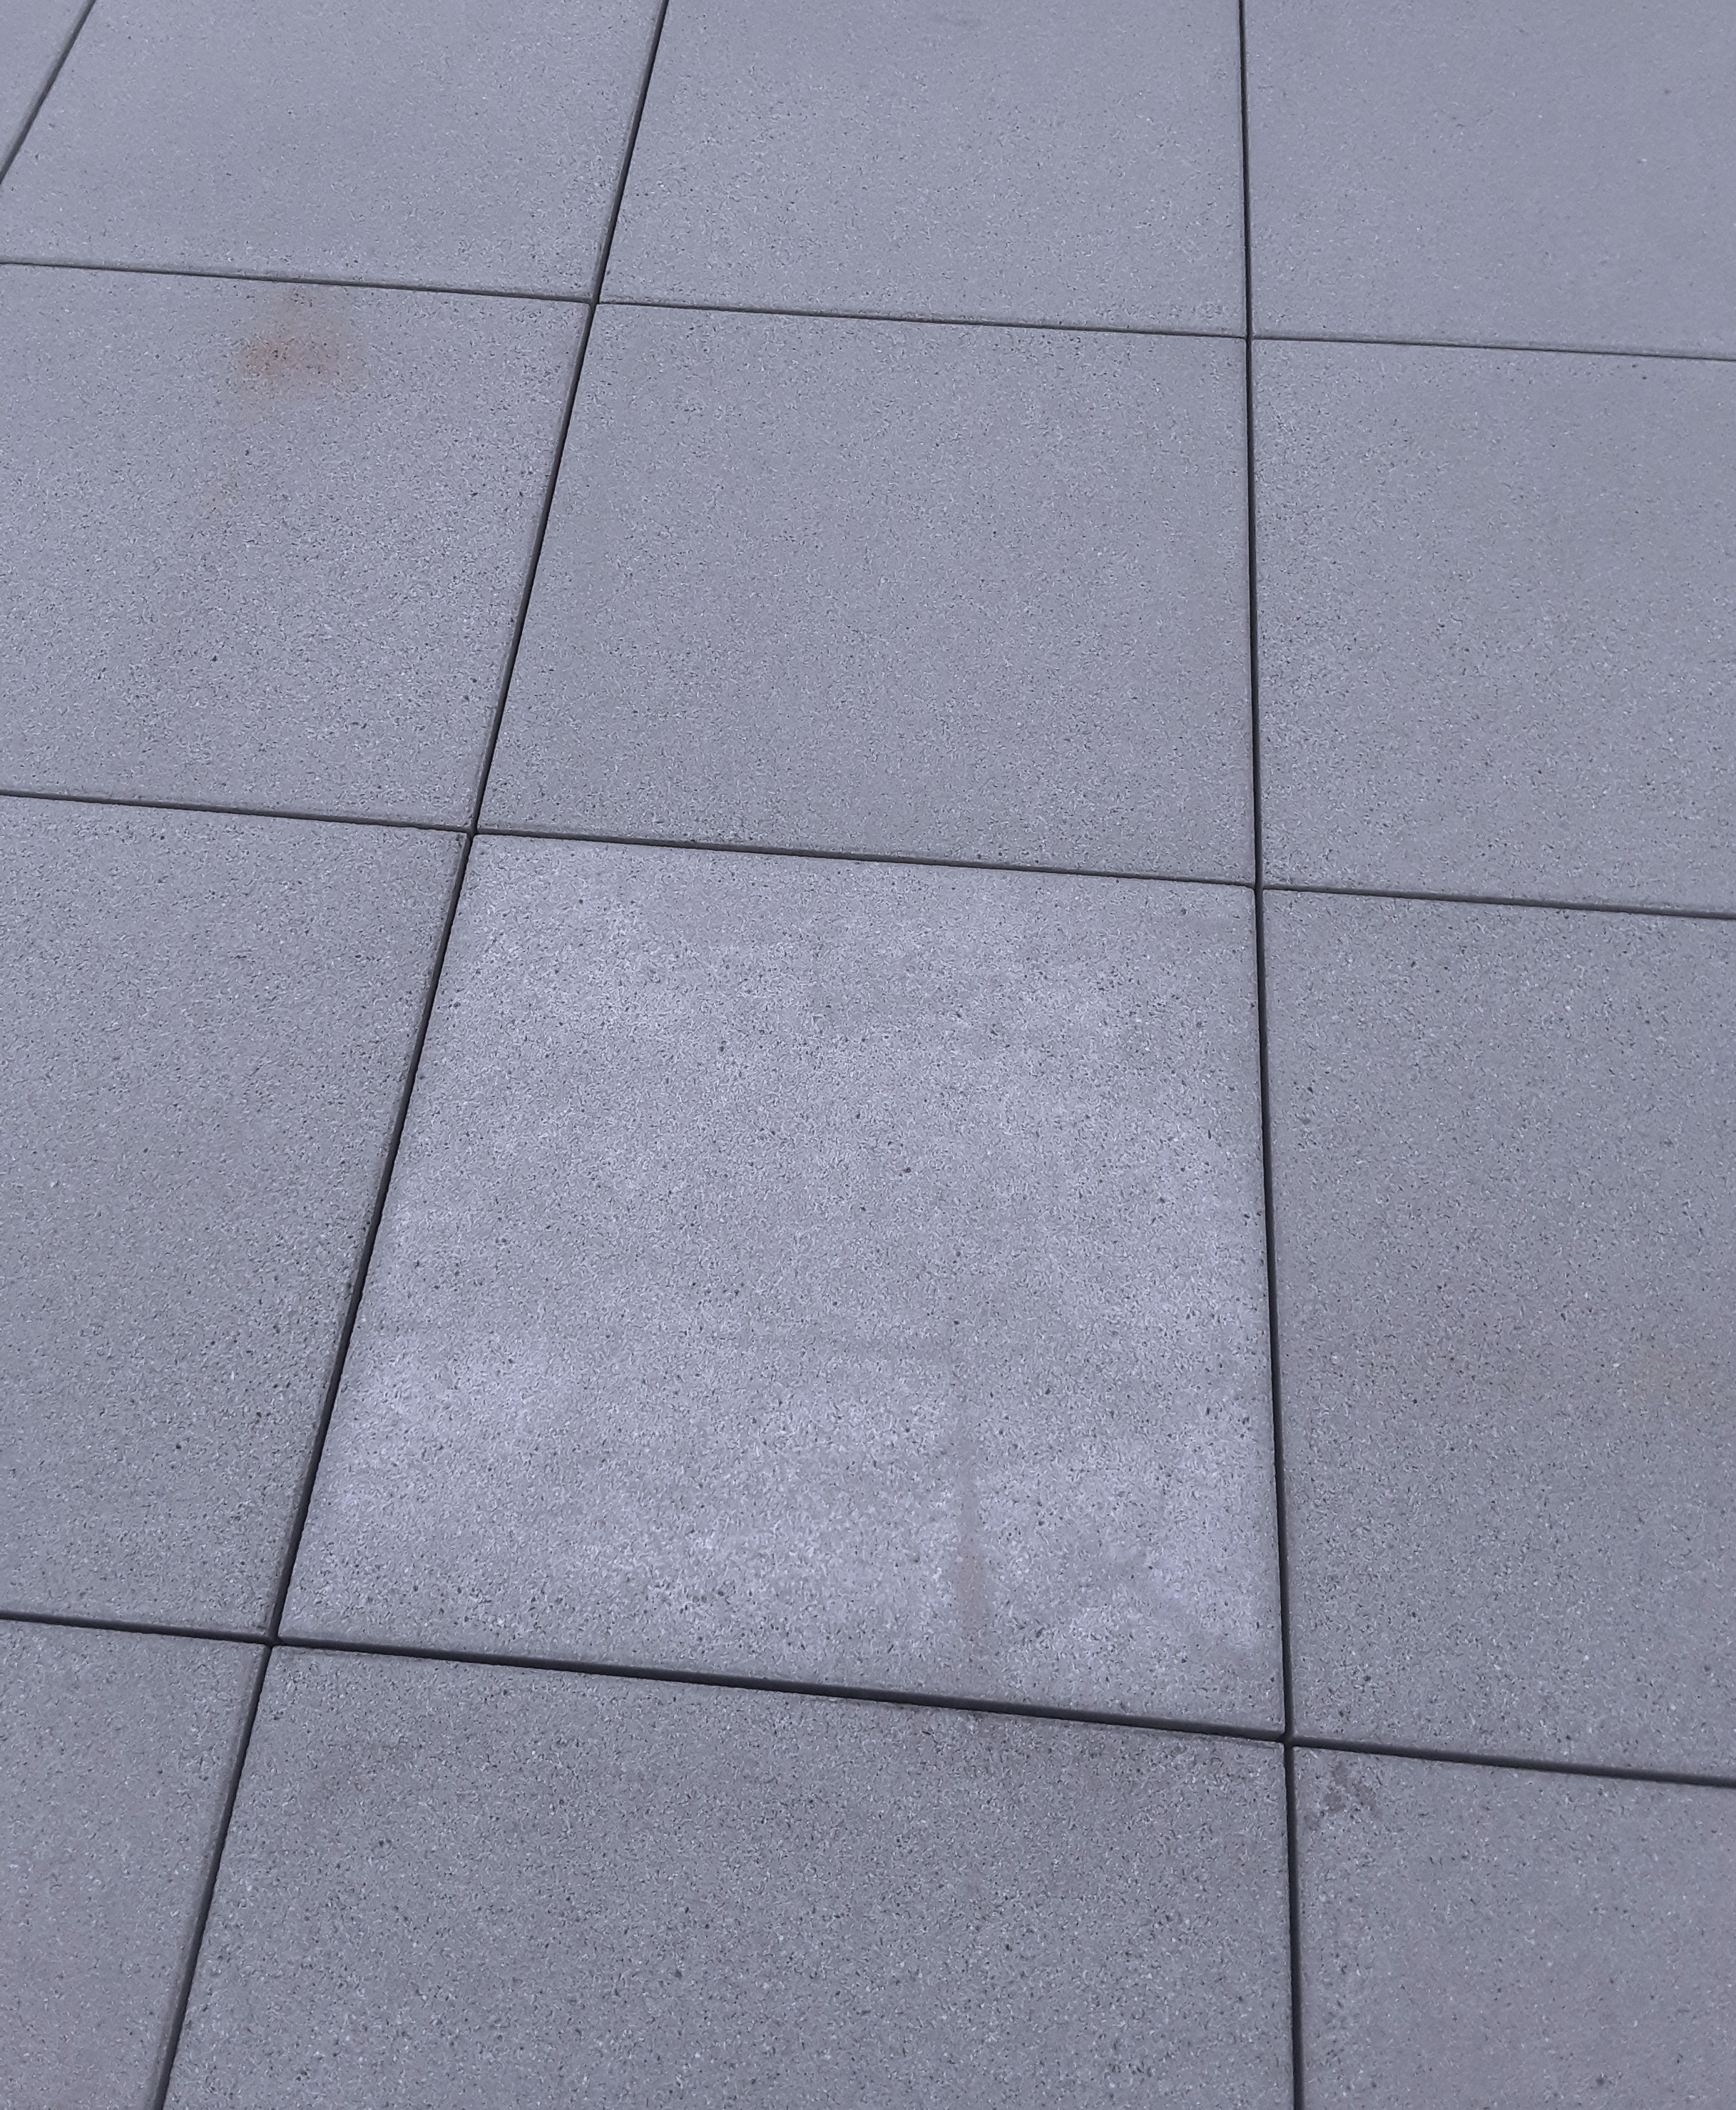 A before image of gray concrete pavers with a tile lighter than the rest due to effloresence.